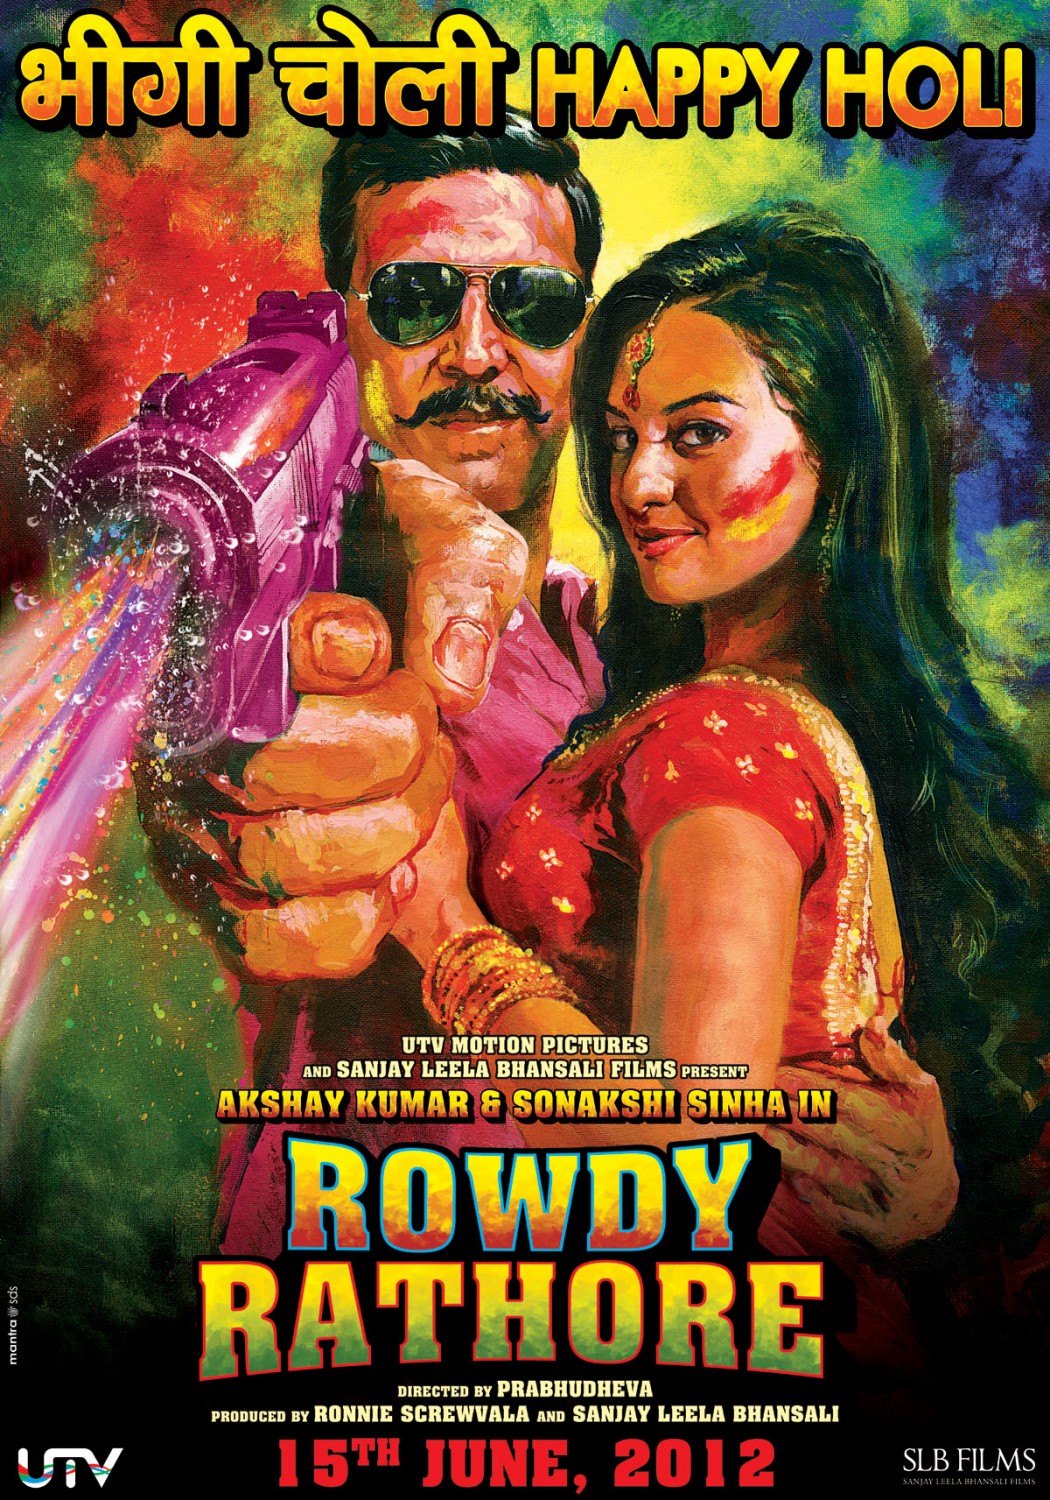 Extra Large Movie Poster Image for Rowdy Rathore (#4 of 7)